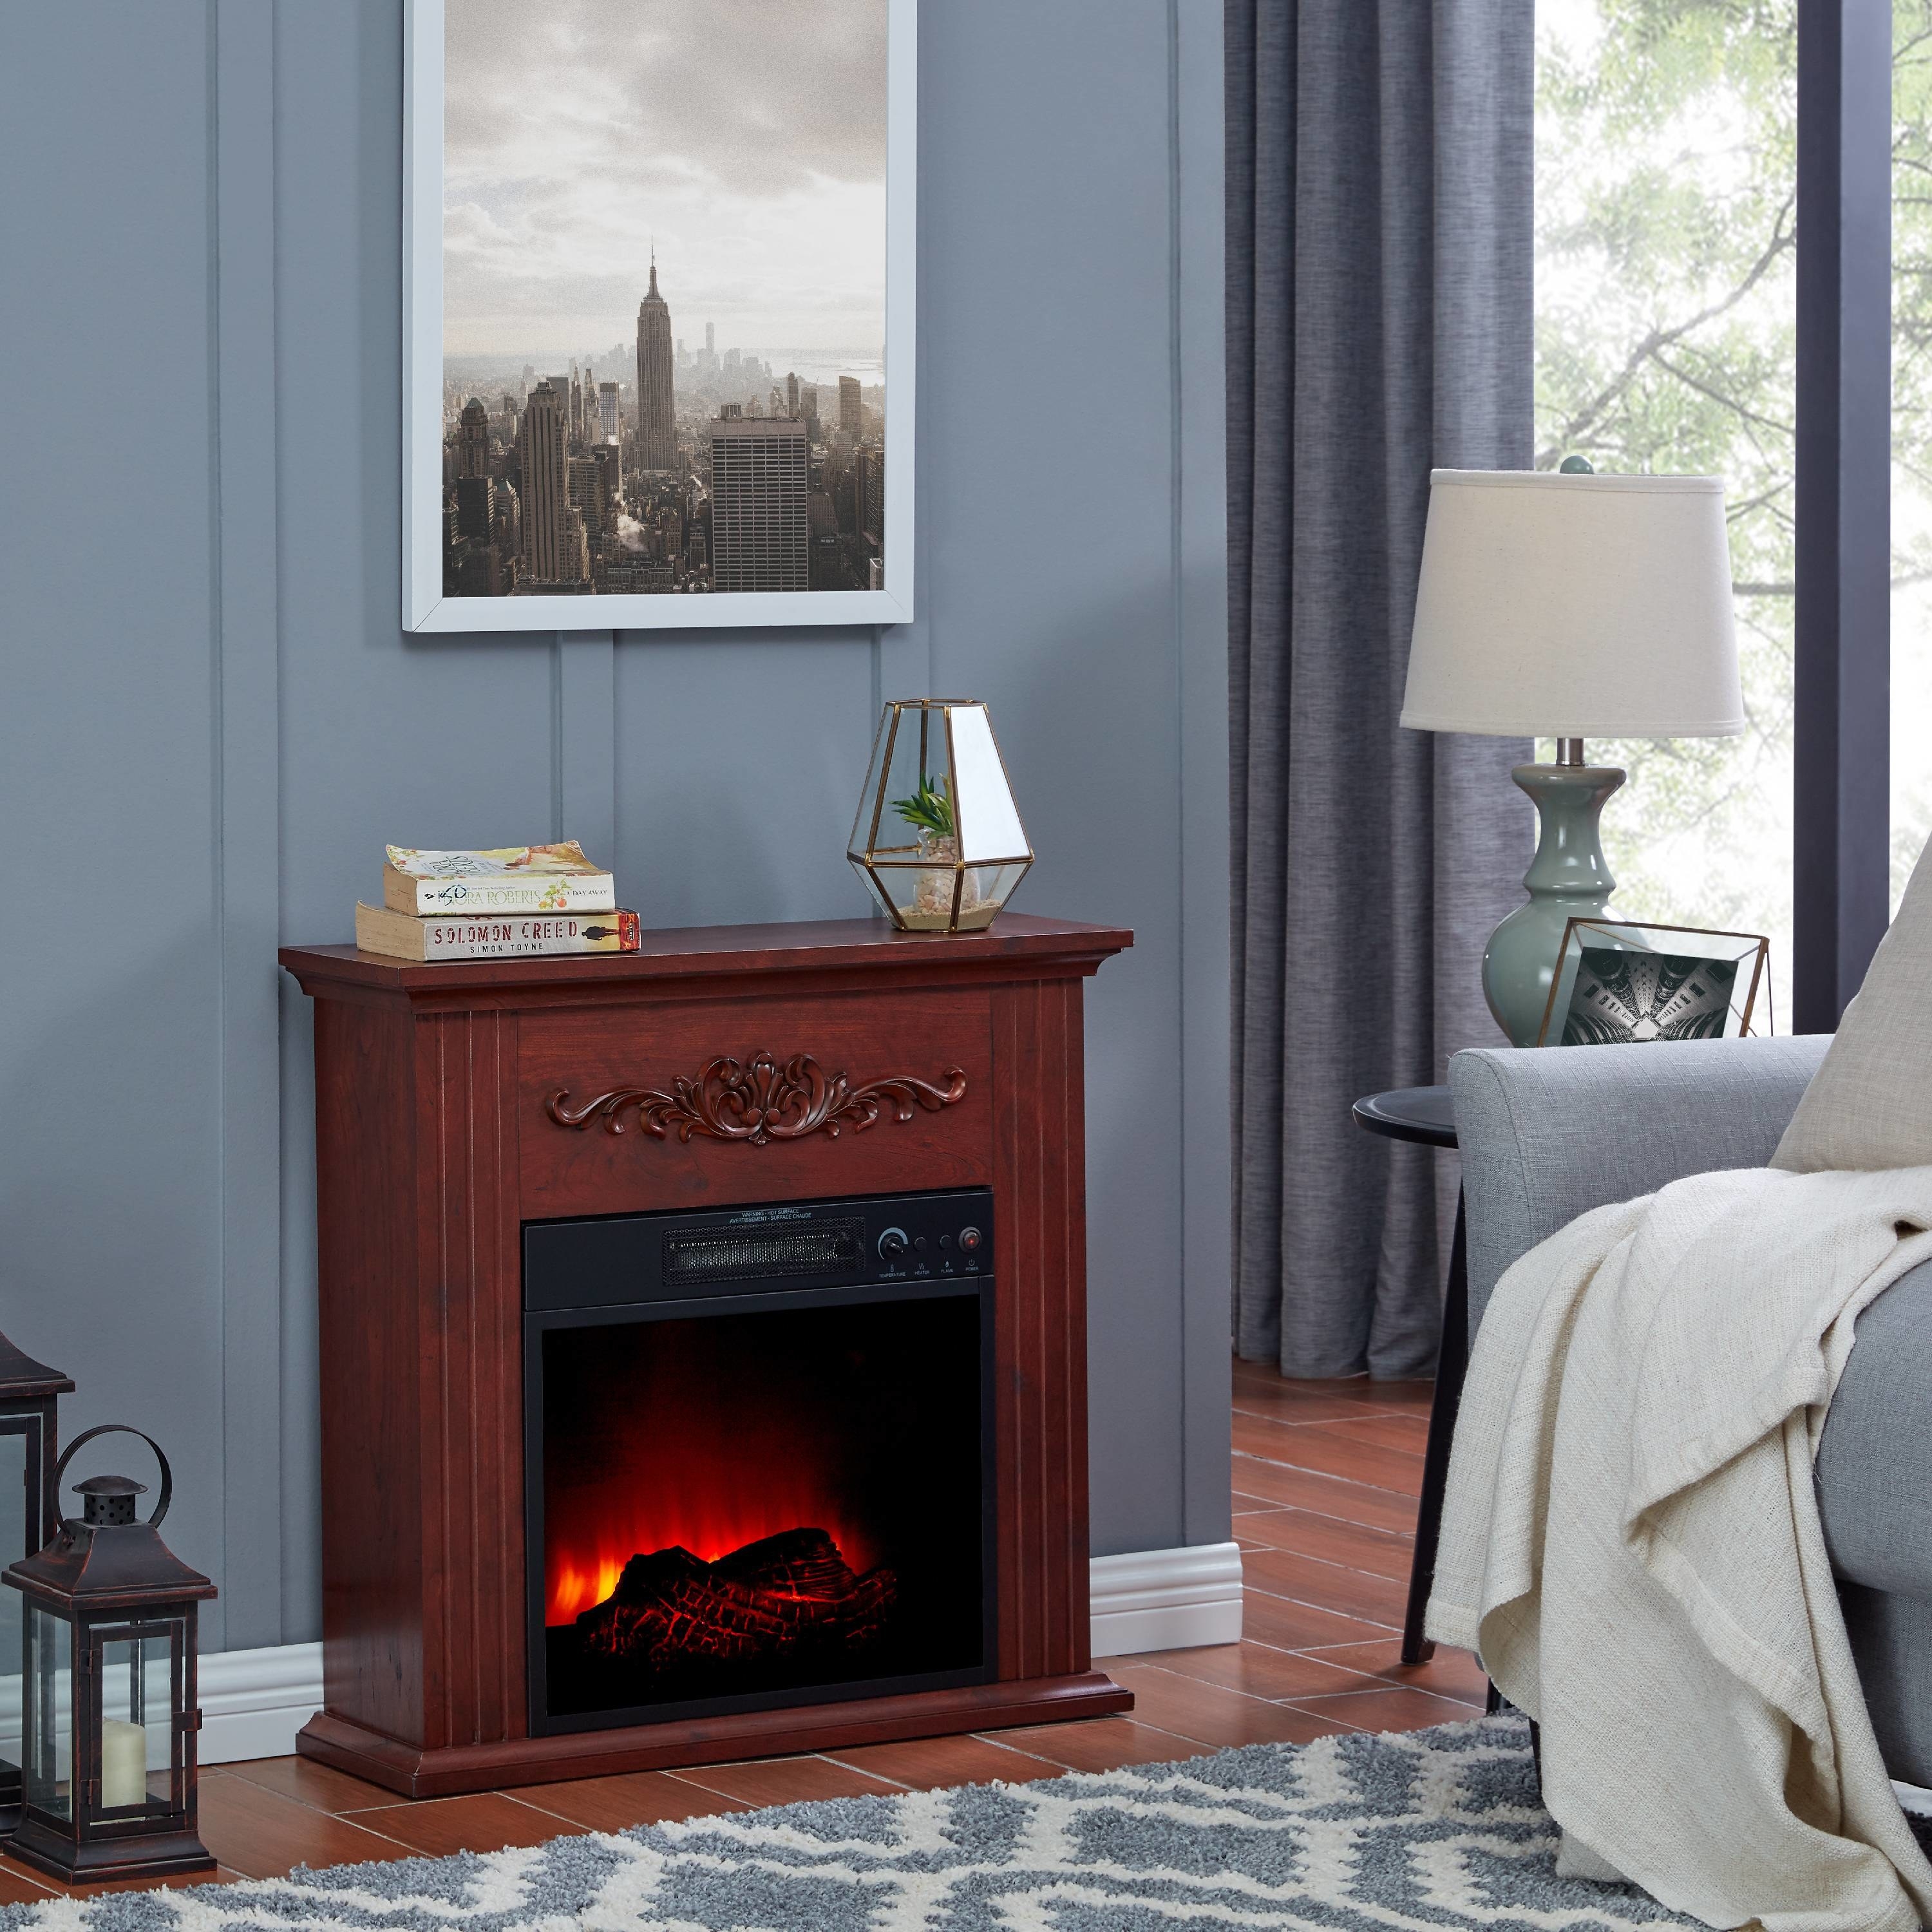 An image of a 28-inch electric fireplace heater in a chestnut color